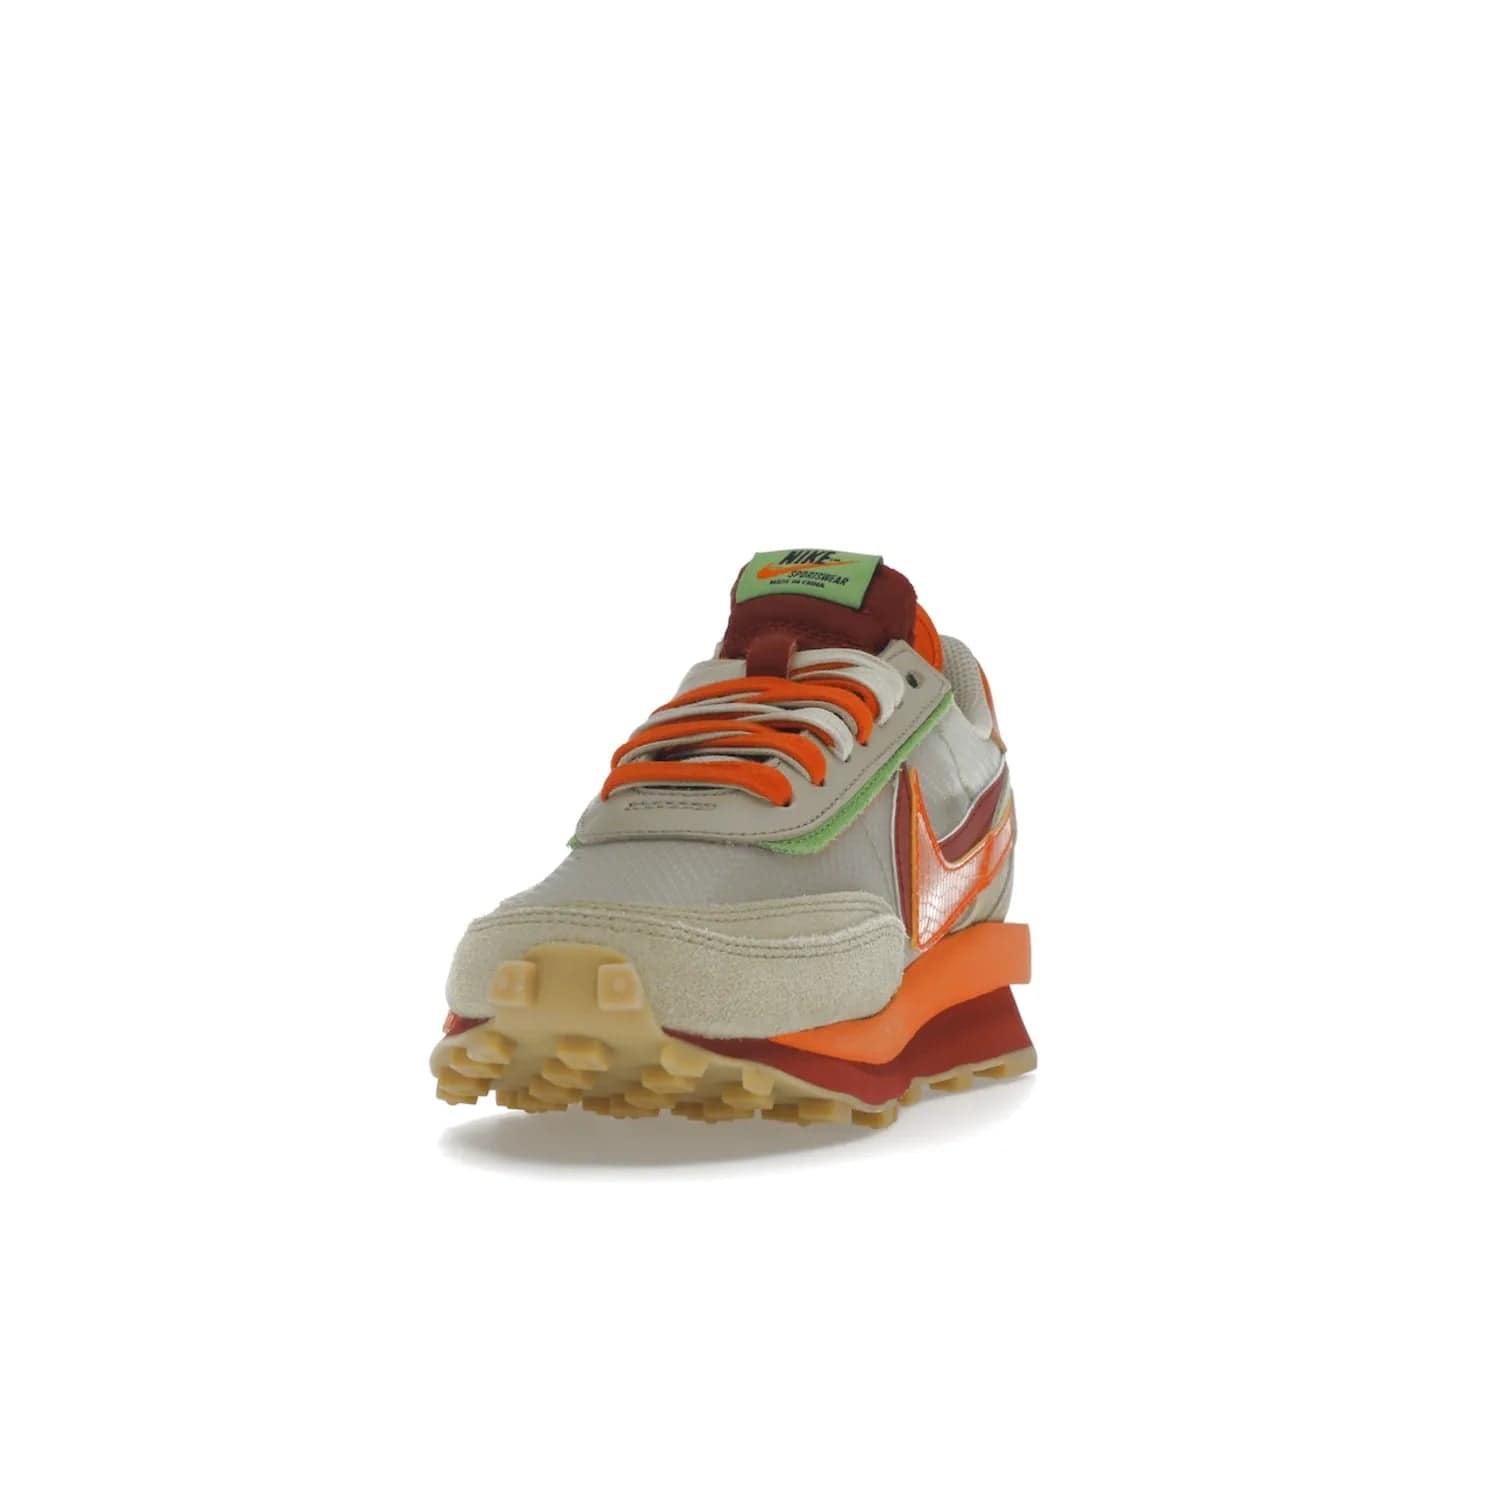 Nike LD Waffle sacai CLOT Kiss of Death Net Orange Blaze - Image 12 - Only at www.BallersClubKickz.com - A bold and stylish Nike LD Waffle sacai CLOT Kiss of Death Net Orange Blaze sneaker featuring a unique off-white, Deep Red & Orange Blaze Swooshes, two-toned stacked sole and doubled tongue. Available in September 2021. Make a statement.